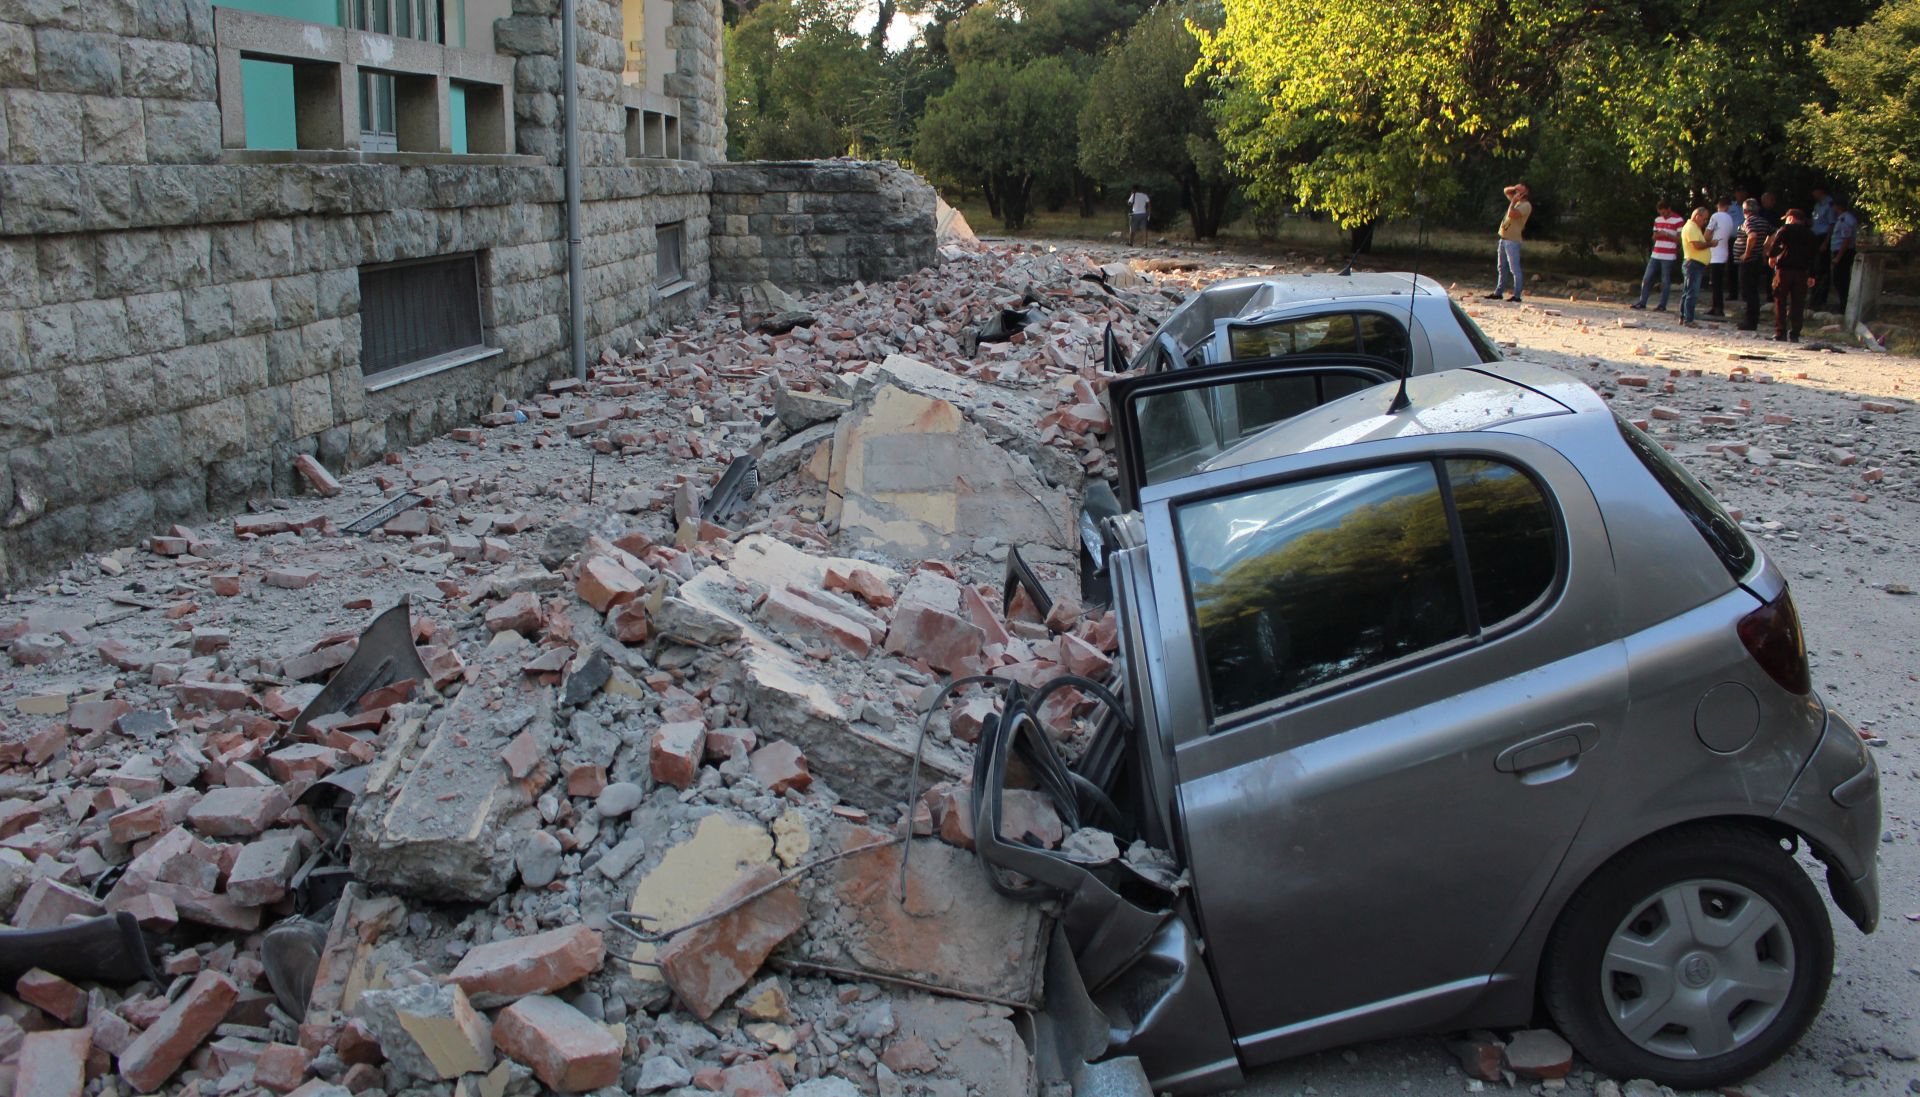 epa07859750 Locals stand at a safe area to watch the damages of crushed cars next to a building of the University of Geology and Mine, after a 5.8 magnitude earthquake hit in Tirana, Albania, 21 September 2019. According to reports, Albania was rocked by its strongest earthquake in 30 years, with the epicentre in the coastal town of Durres, at least 49 people have been reported injured from the earthquake.  EPA/MALTON DIBRA